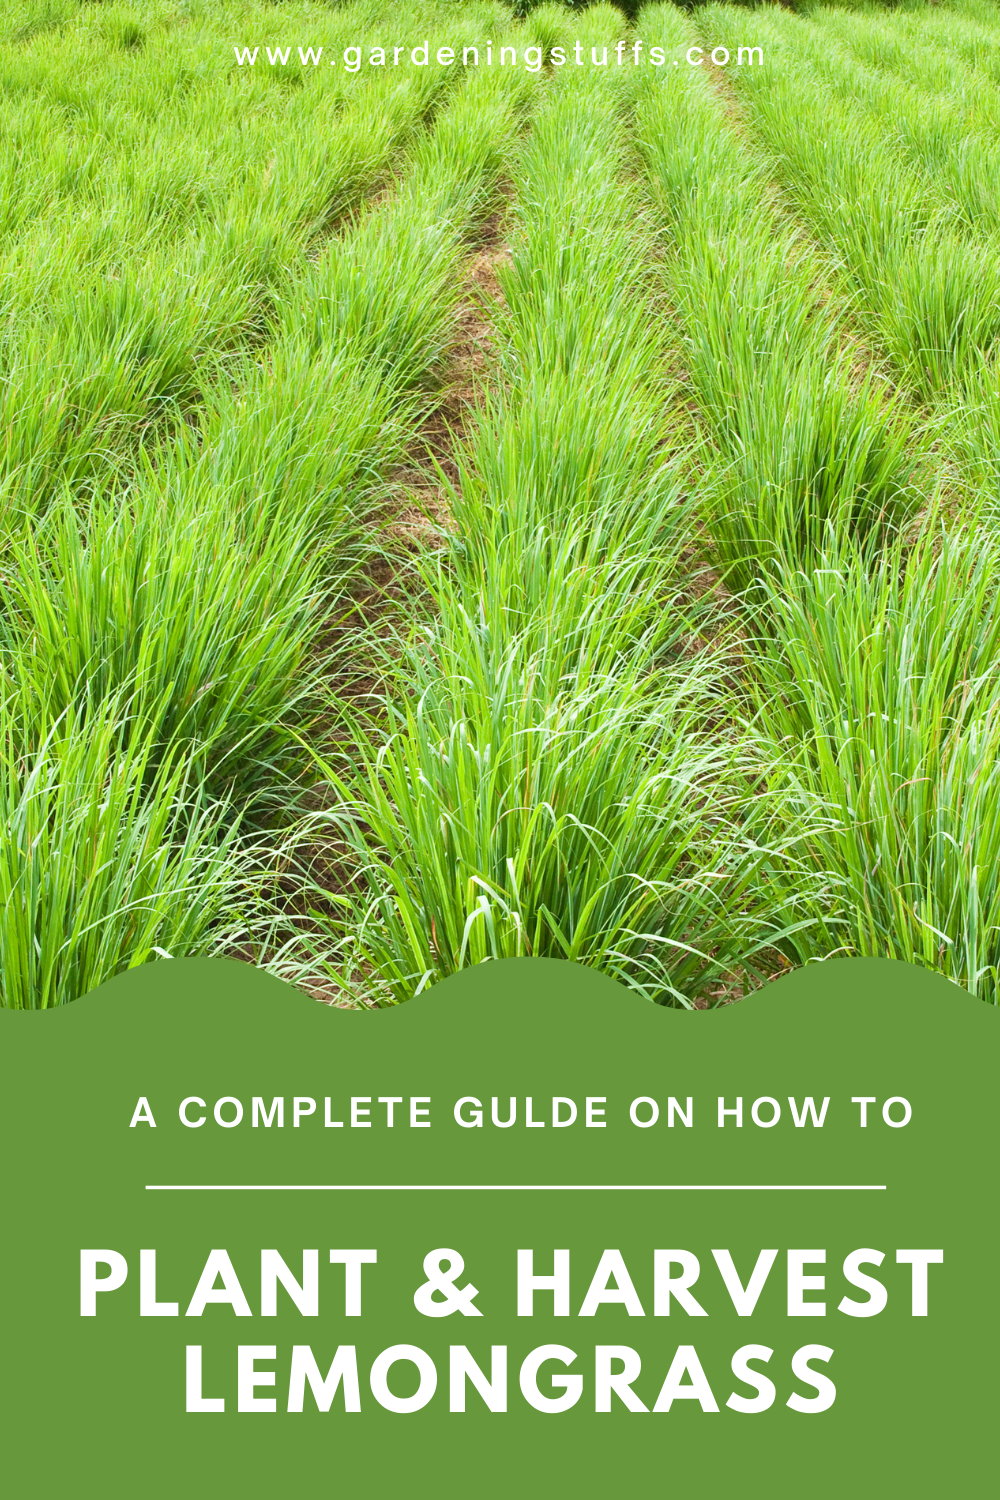 Lemongrass is a fragrant tropical grass that is widely used in Asian cooking. Read on for our handy guide on how to grow, care and harvest lemongrass. It’s very easy to grow and it will save you money on ingredients with your self-replenishing supply.